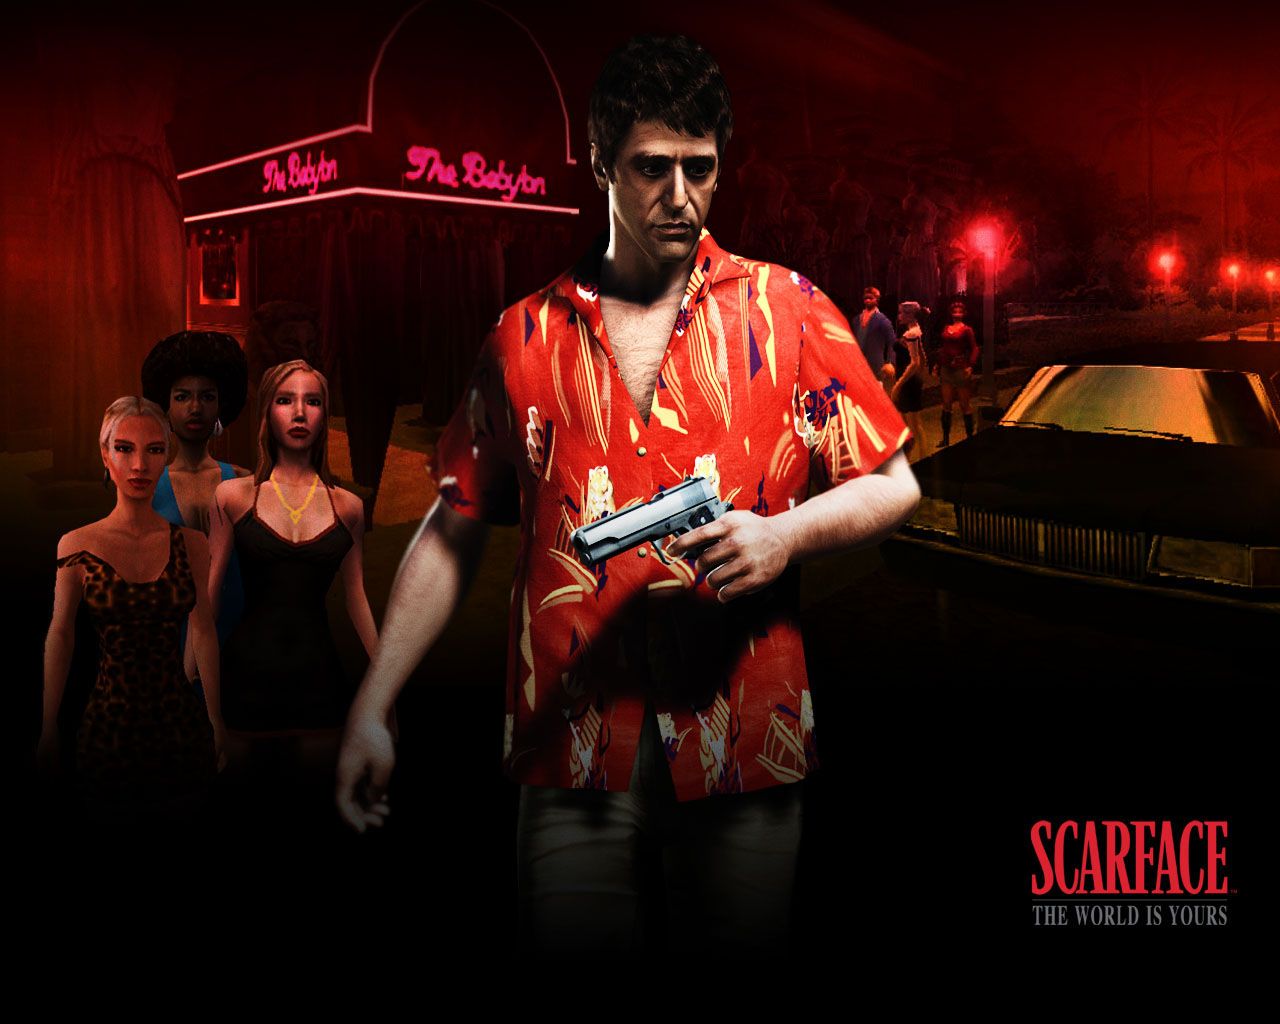 Free download Scarface The World is Yours Wallpapers [1280x1024